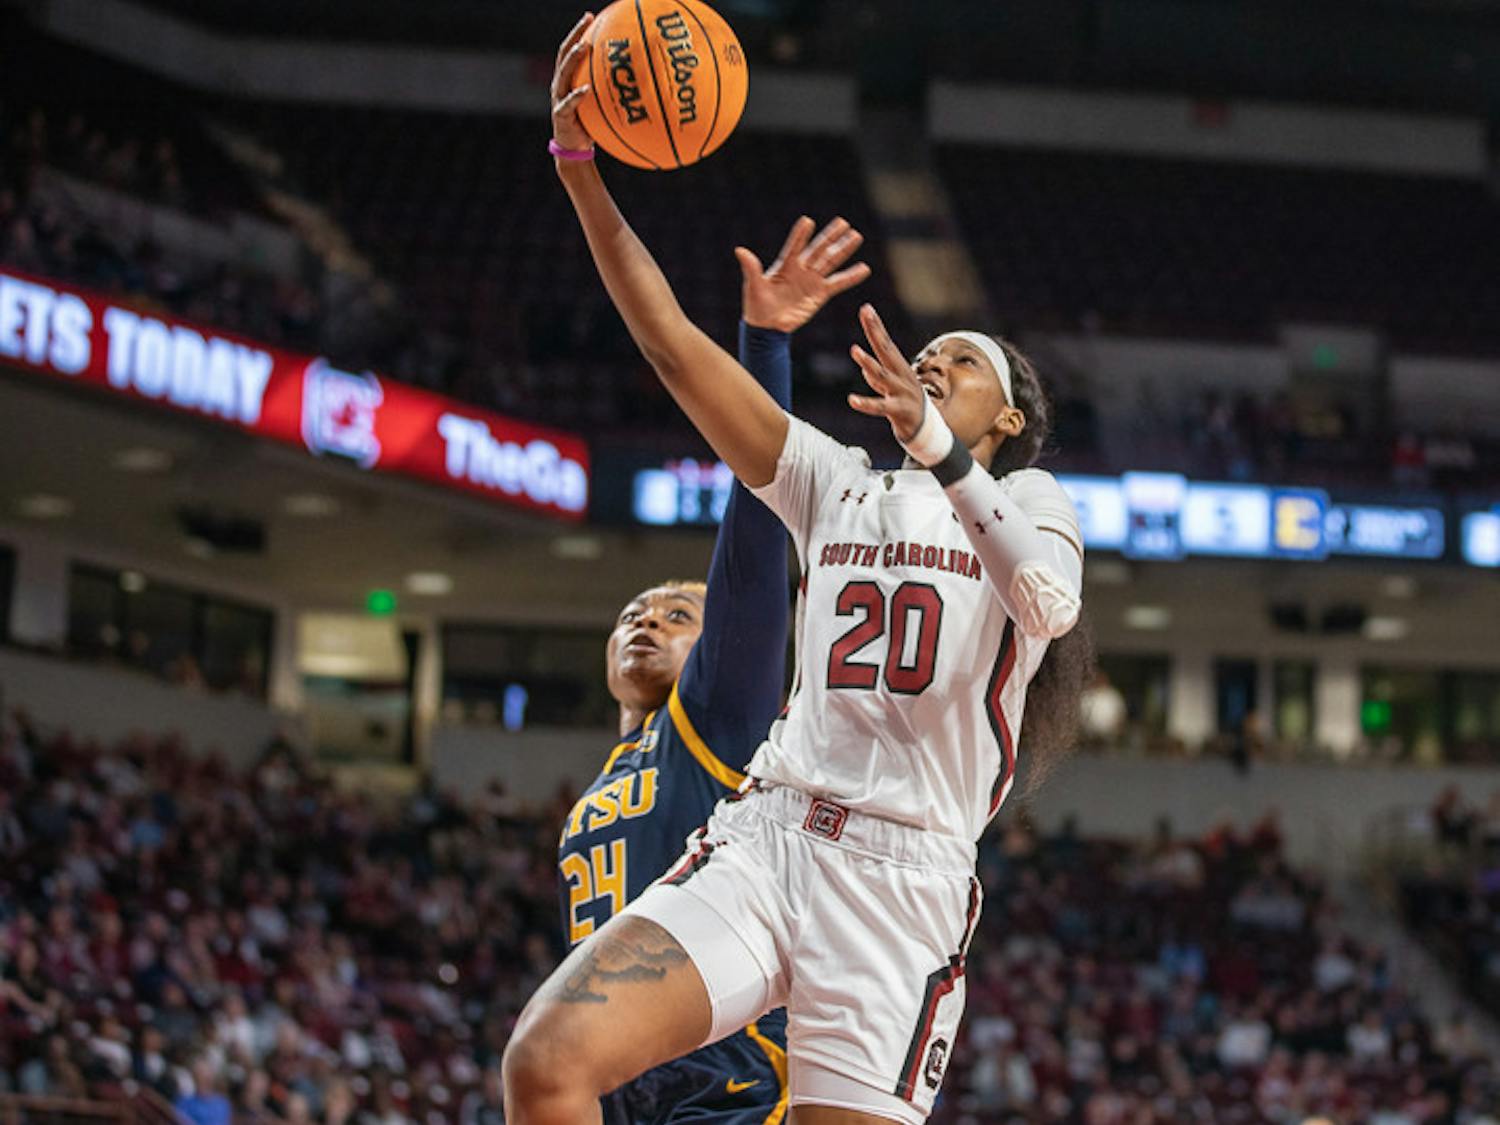 Sophomore Sania Feagin attempts the contested layup during the fast break during South Carolina's matchup with East Tennessee State on Nov. 7, 2022. Feagin finished the game with 15 points.&nbsp;